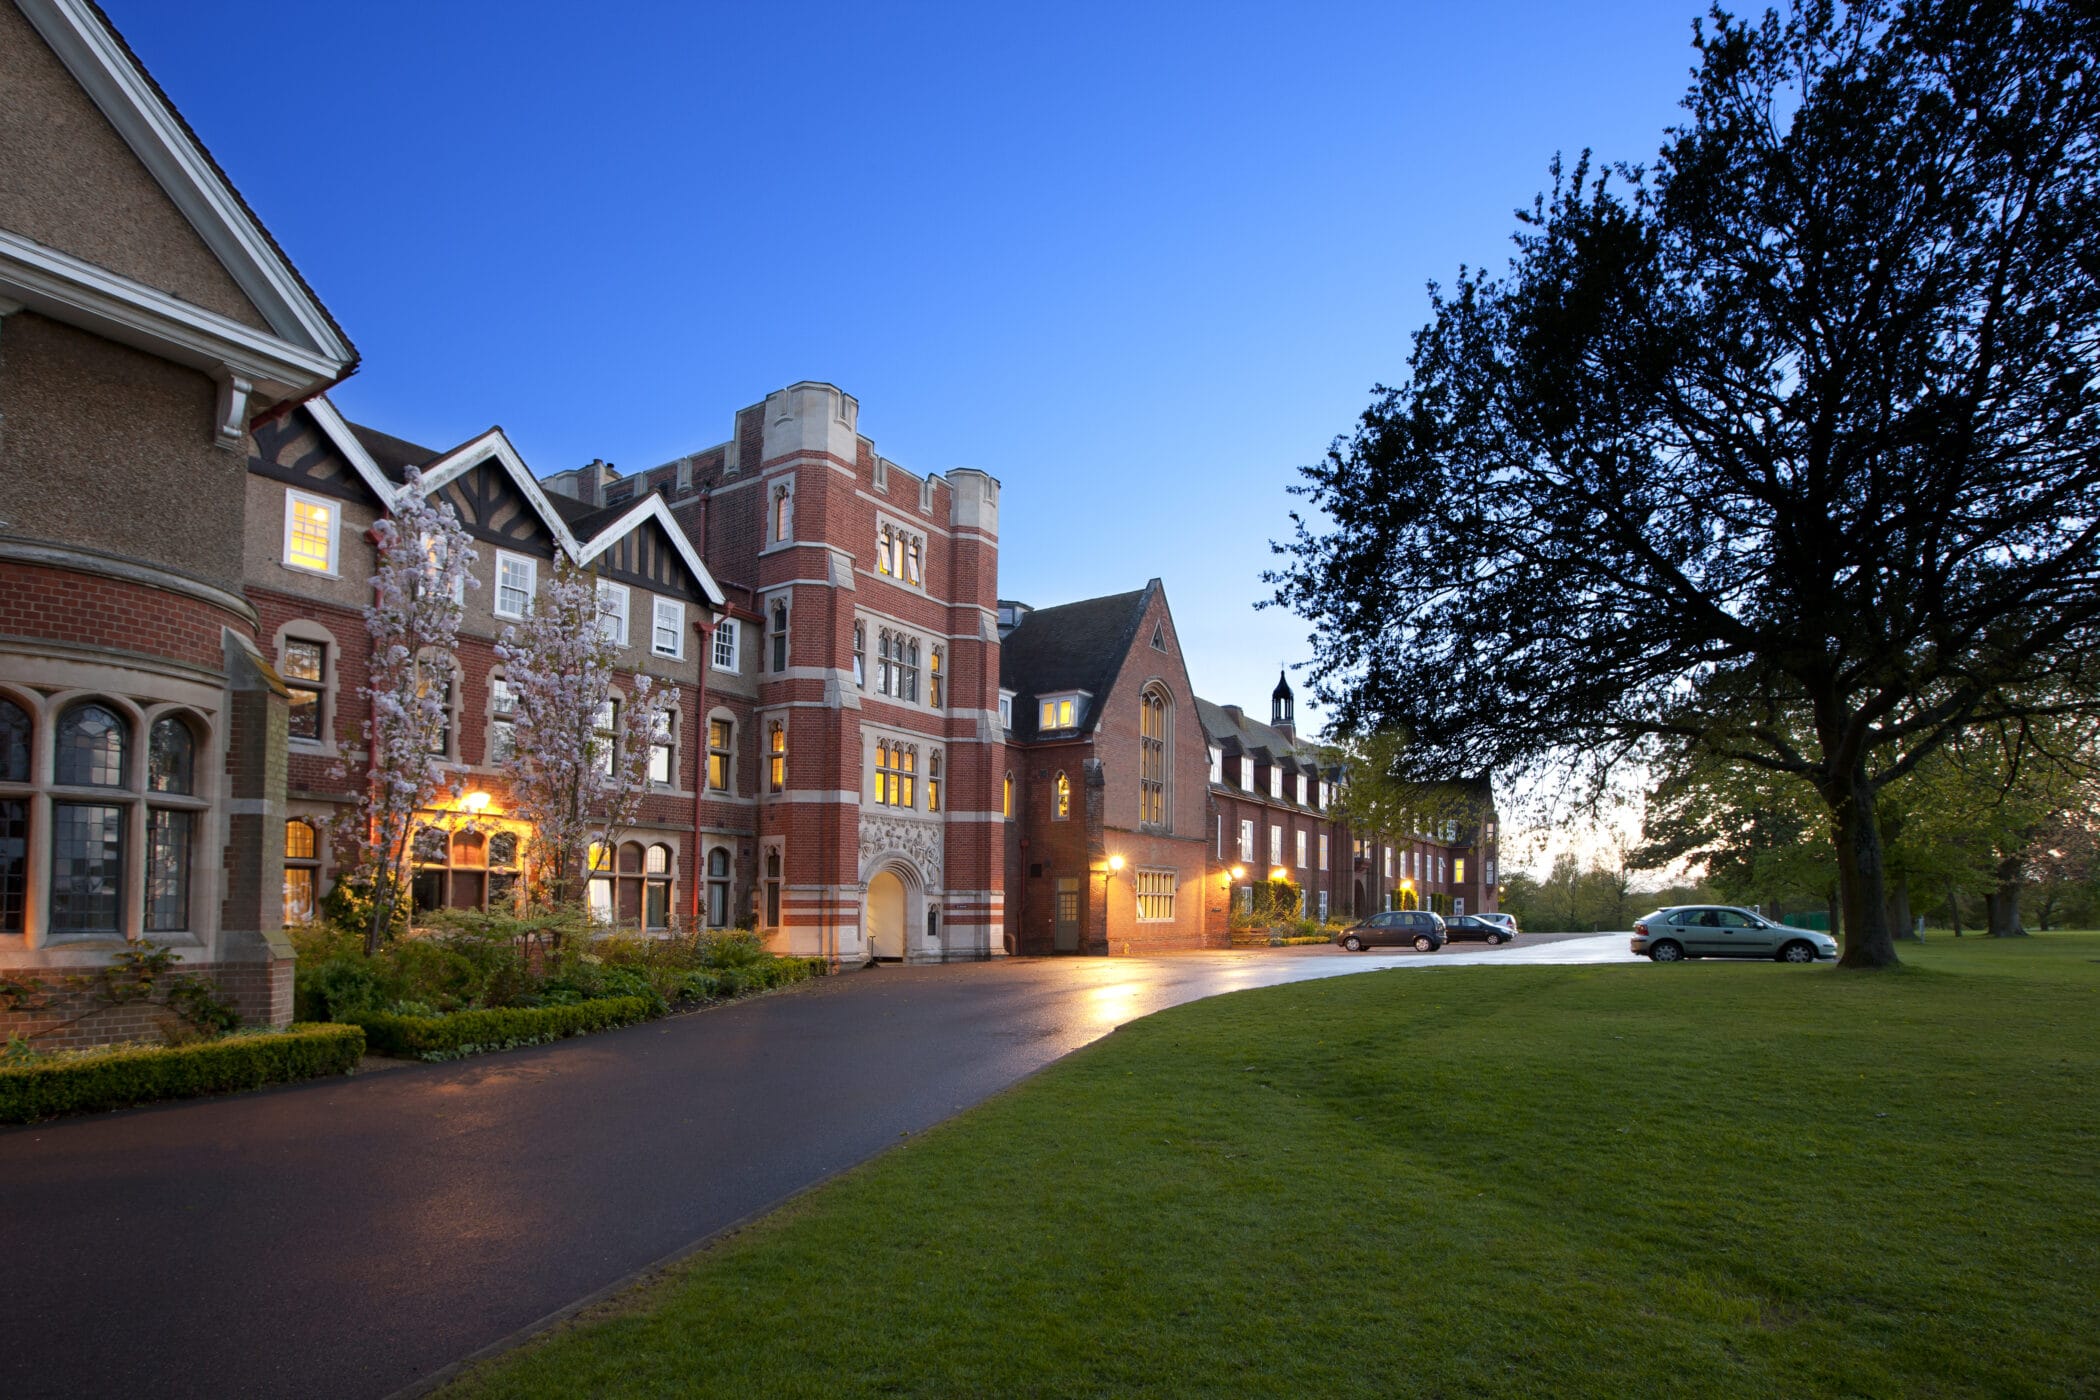 Residential facilities at Radley College